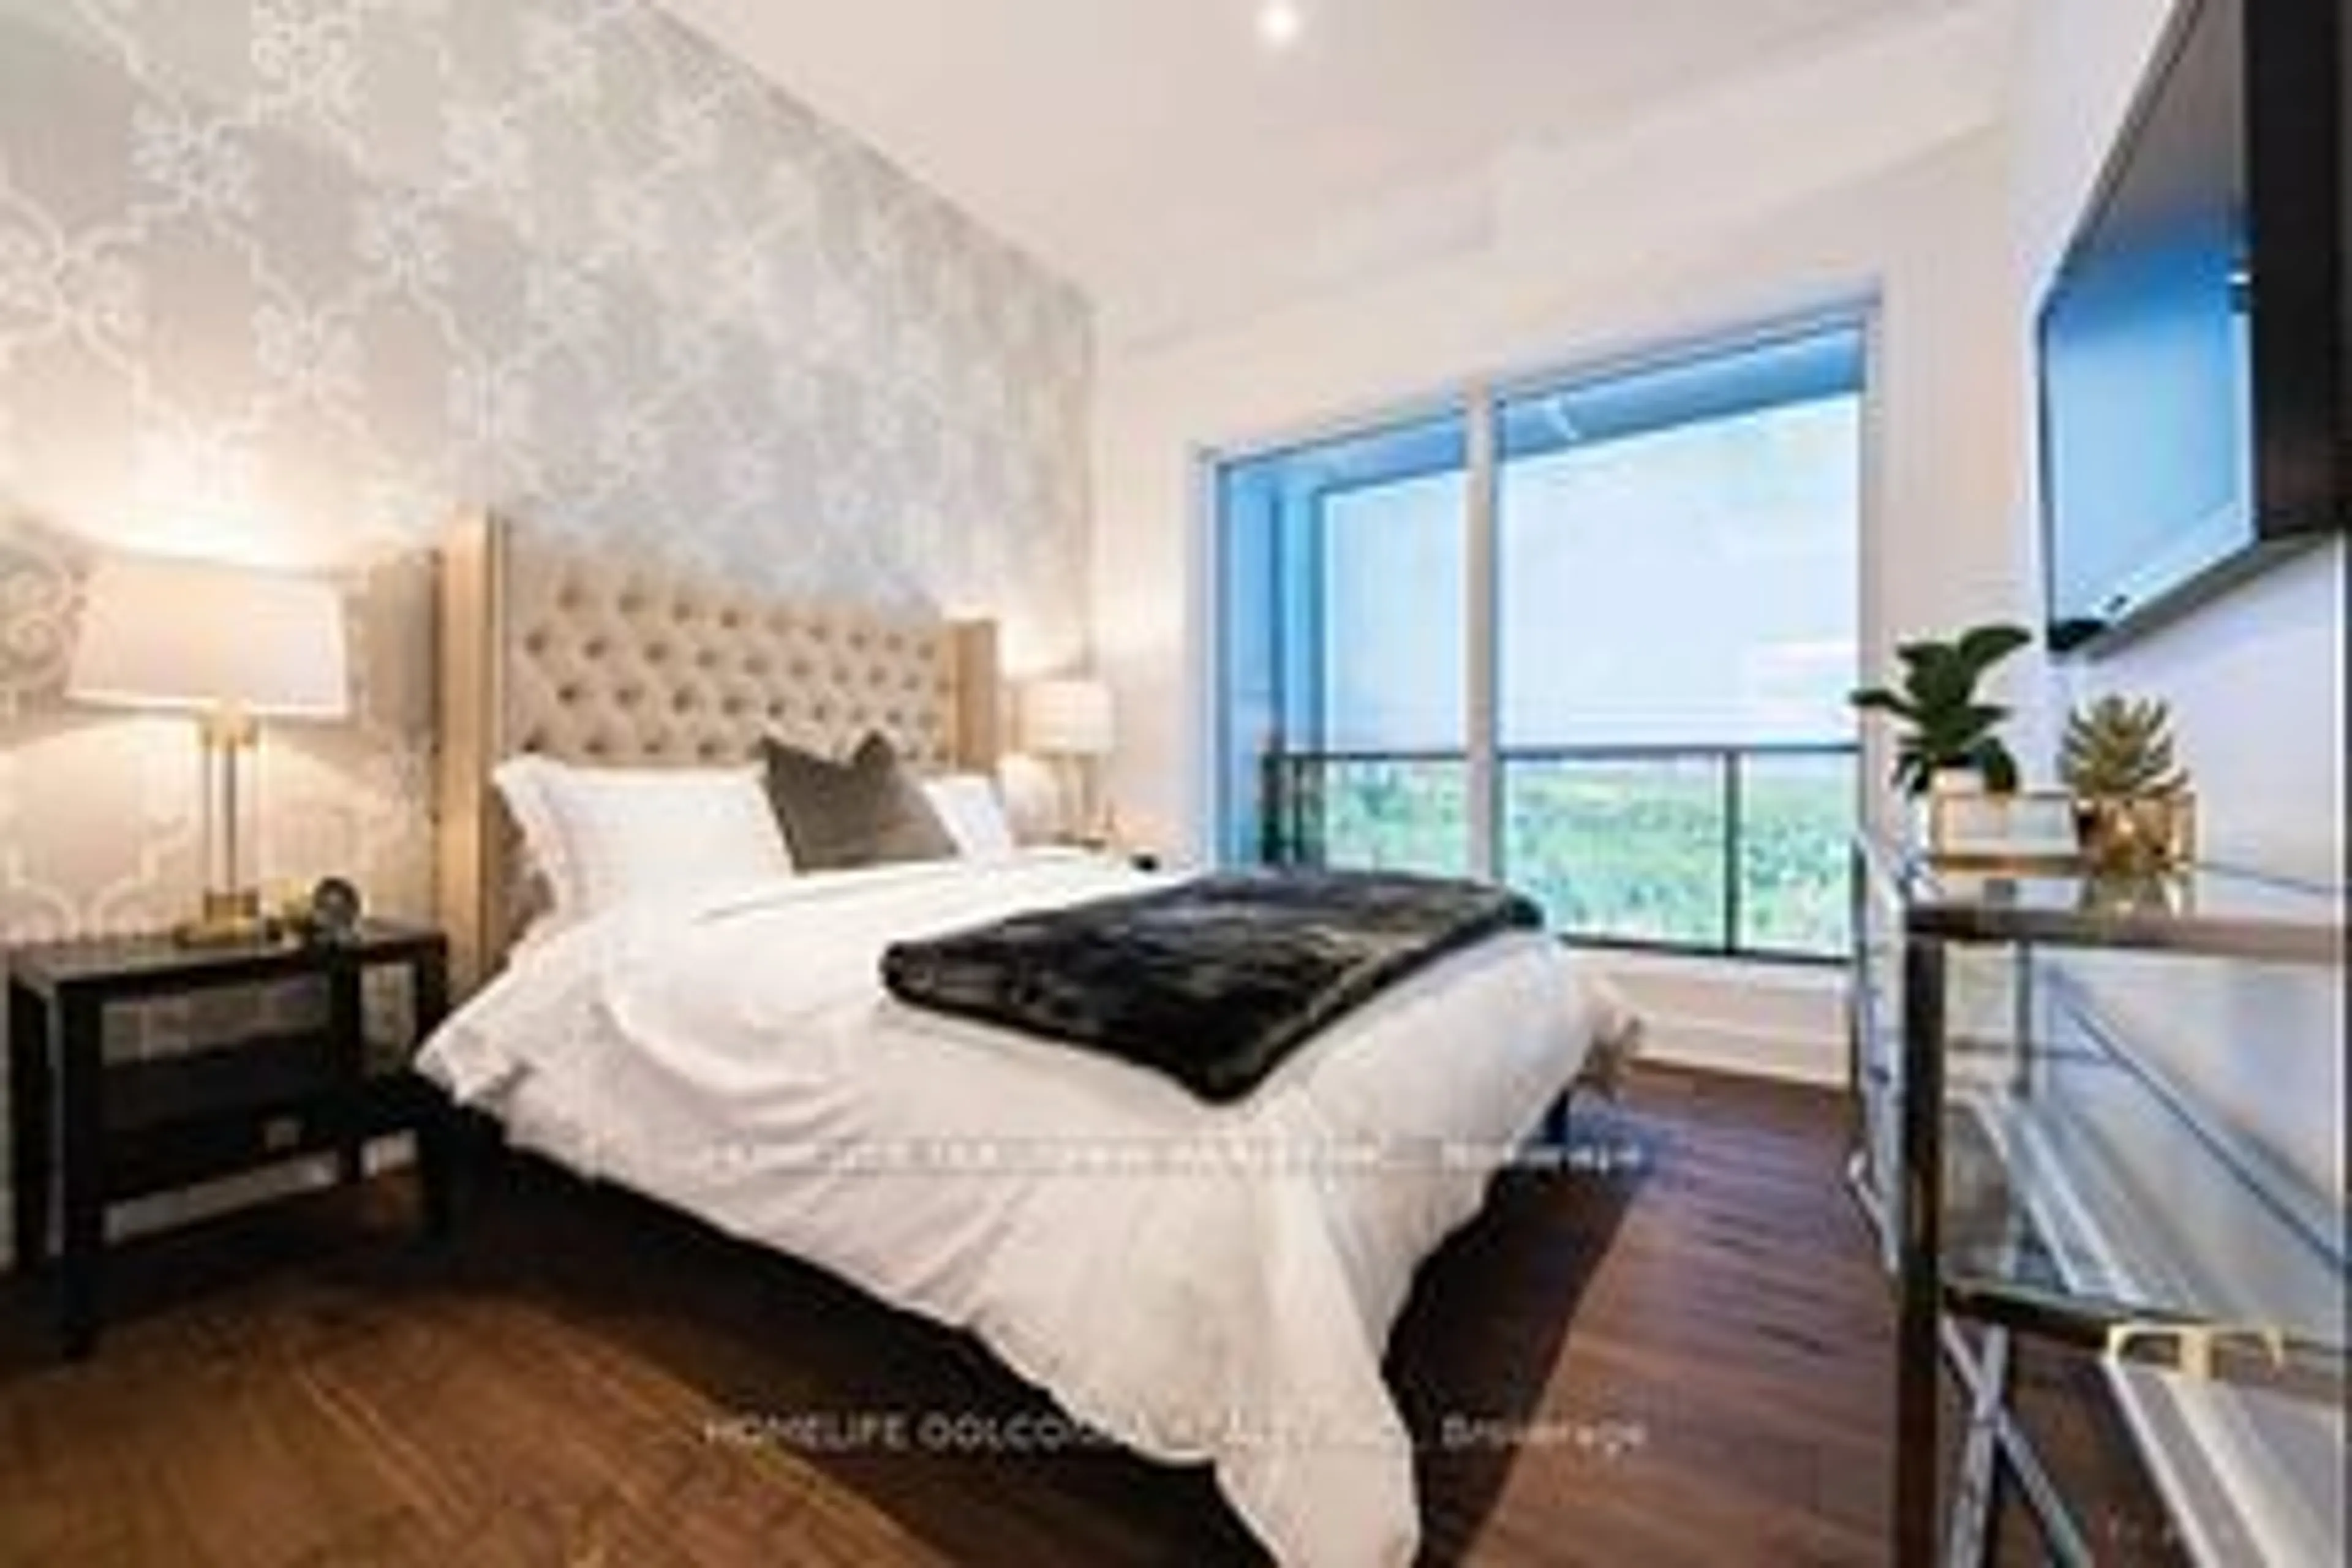 Bedroom for 7 Olympic Gdn Dr #N653, Toronto Ontario M2M 2A9